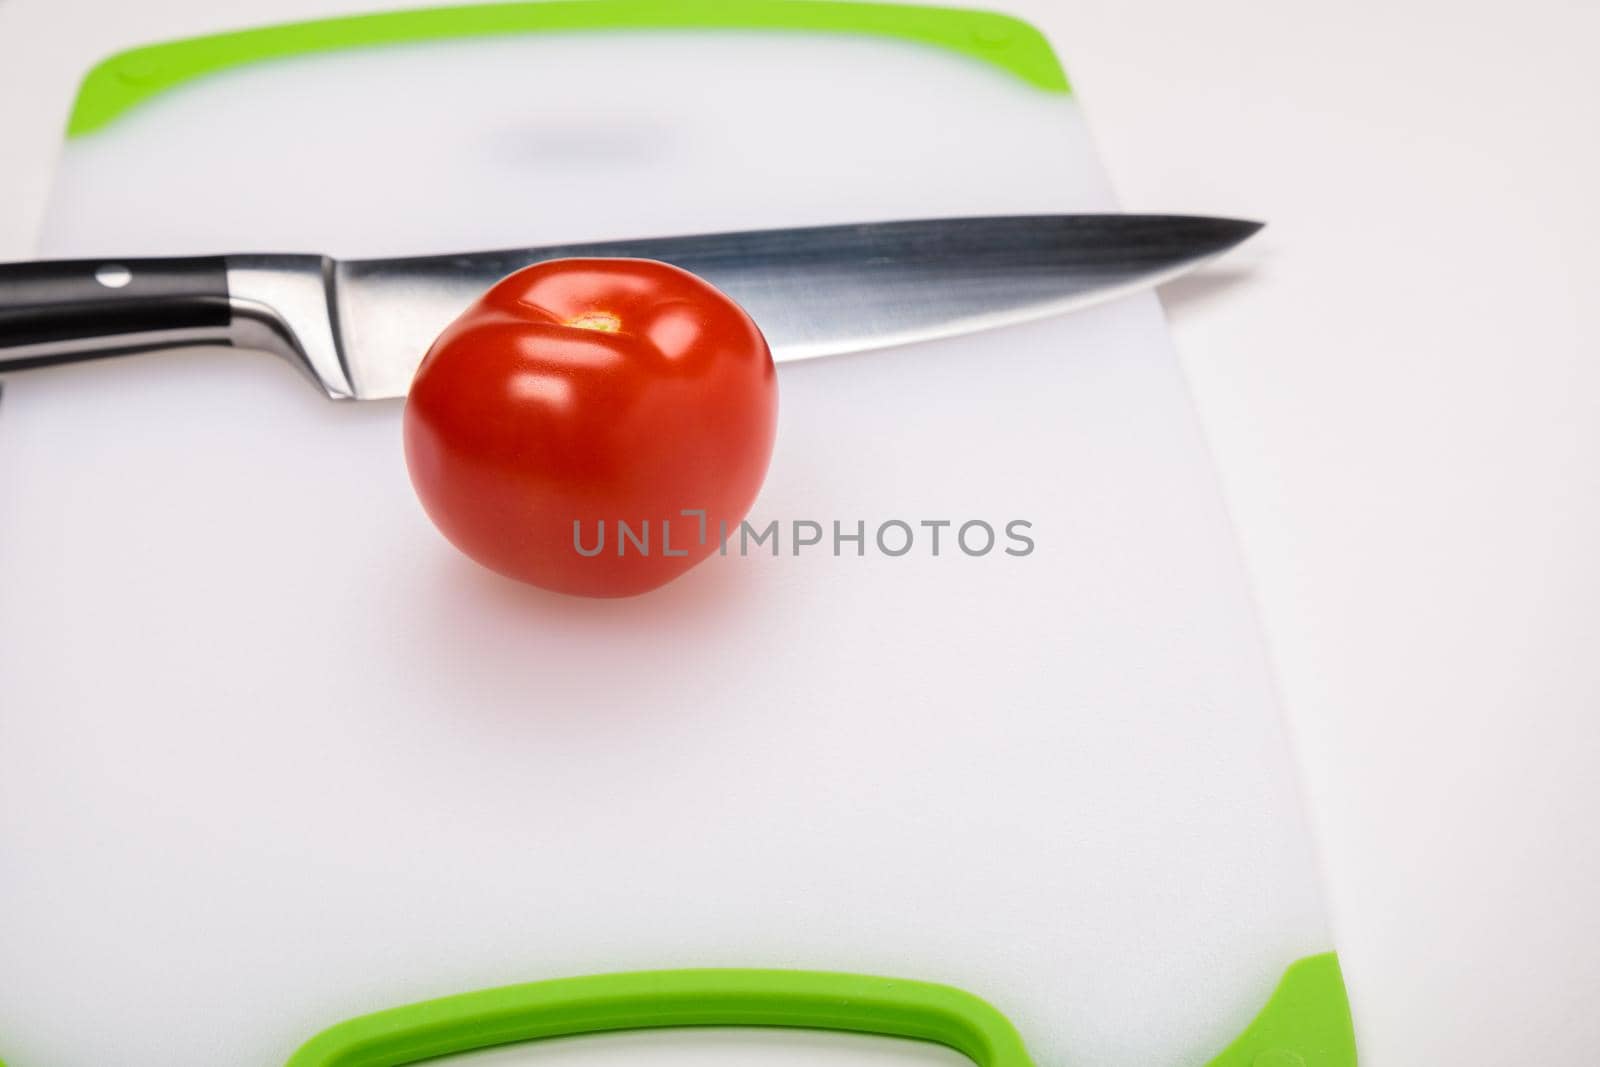 A fresh red tomato and a large chef's knife lie on a cutting board. by Yurich32